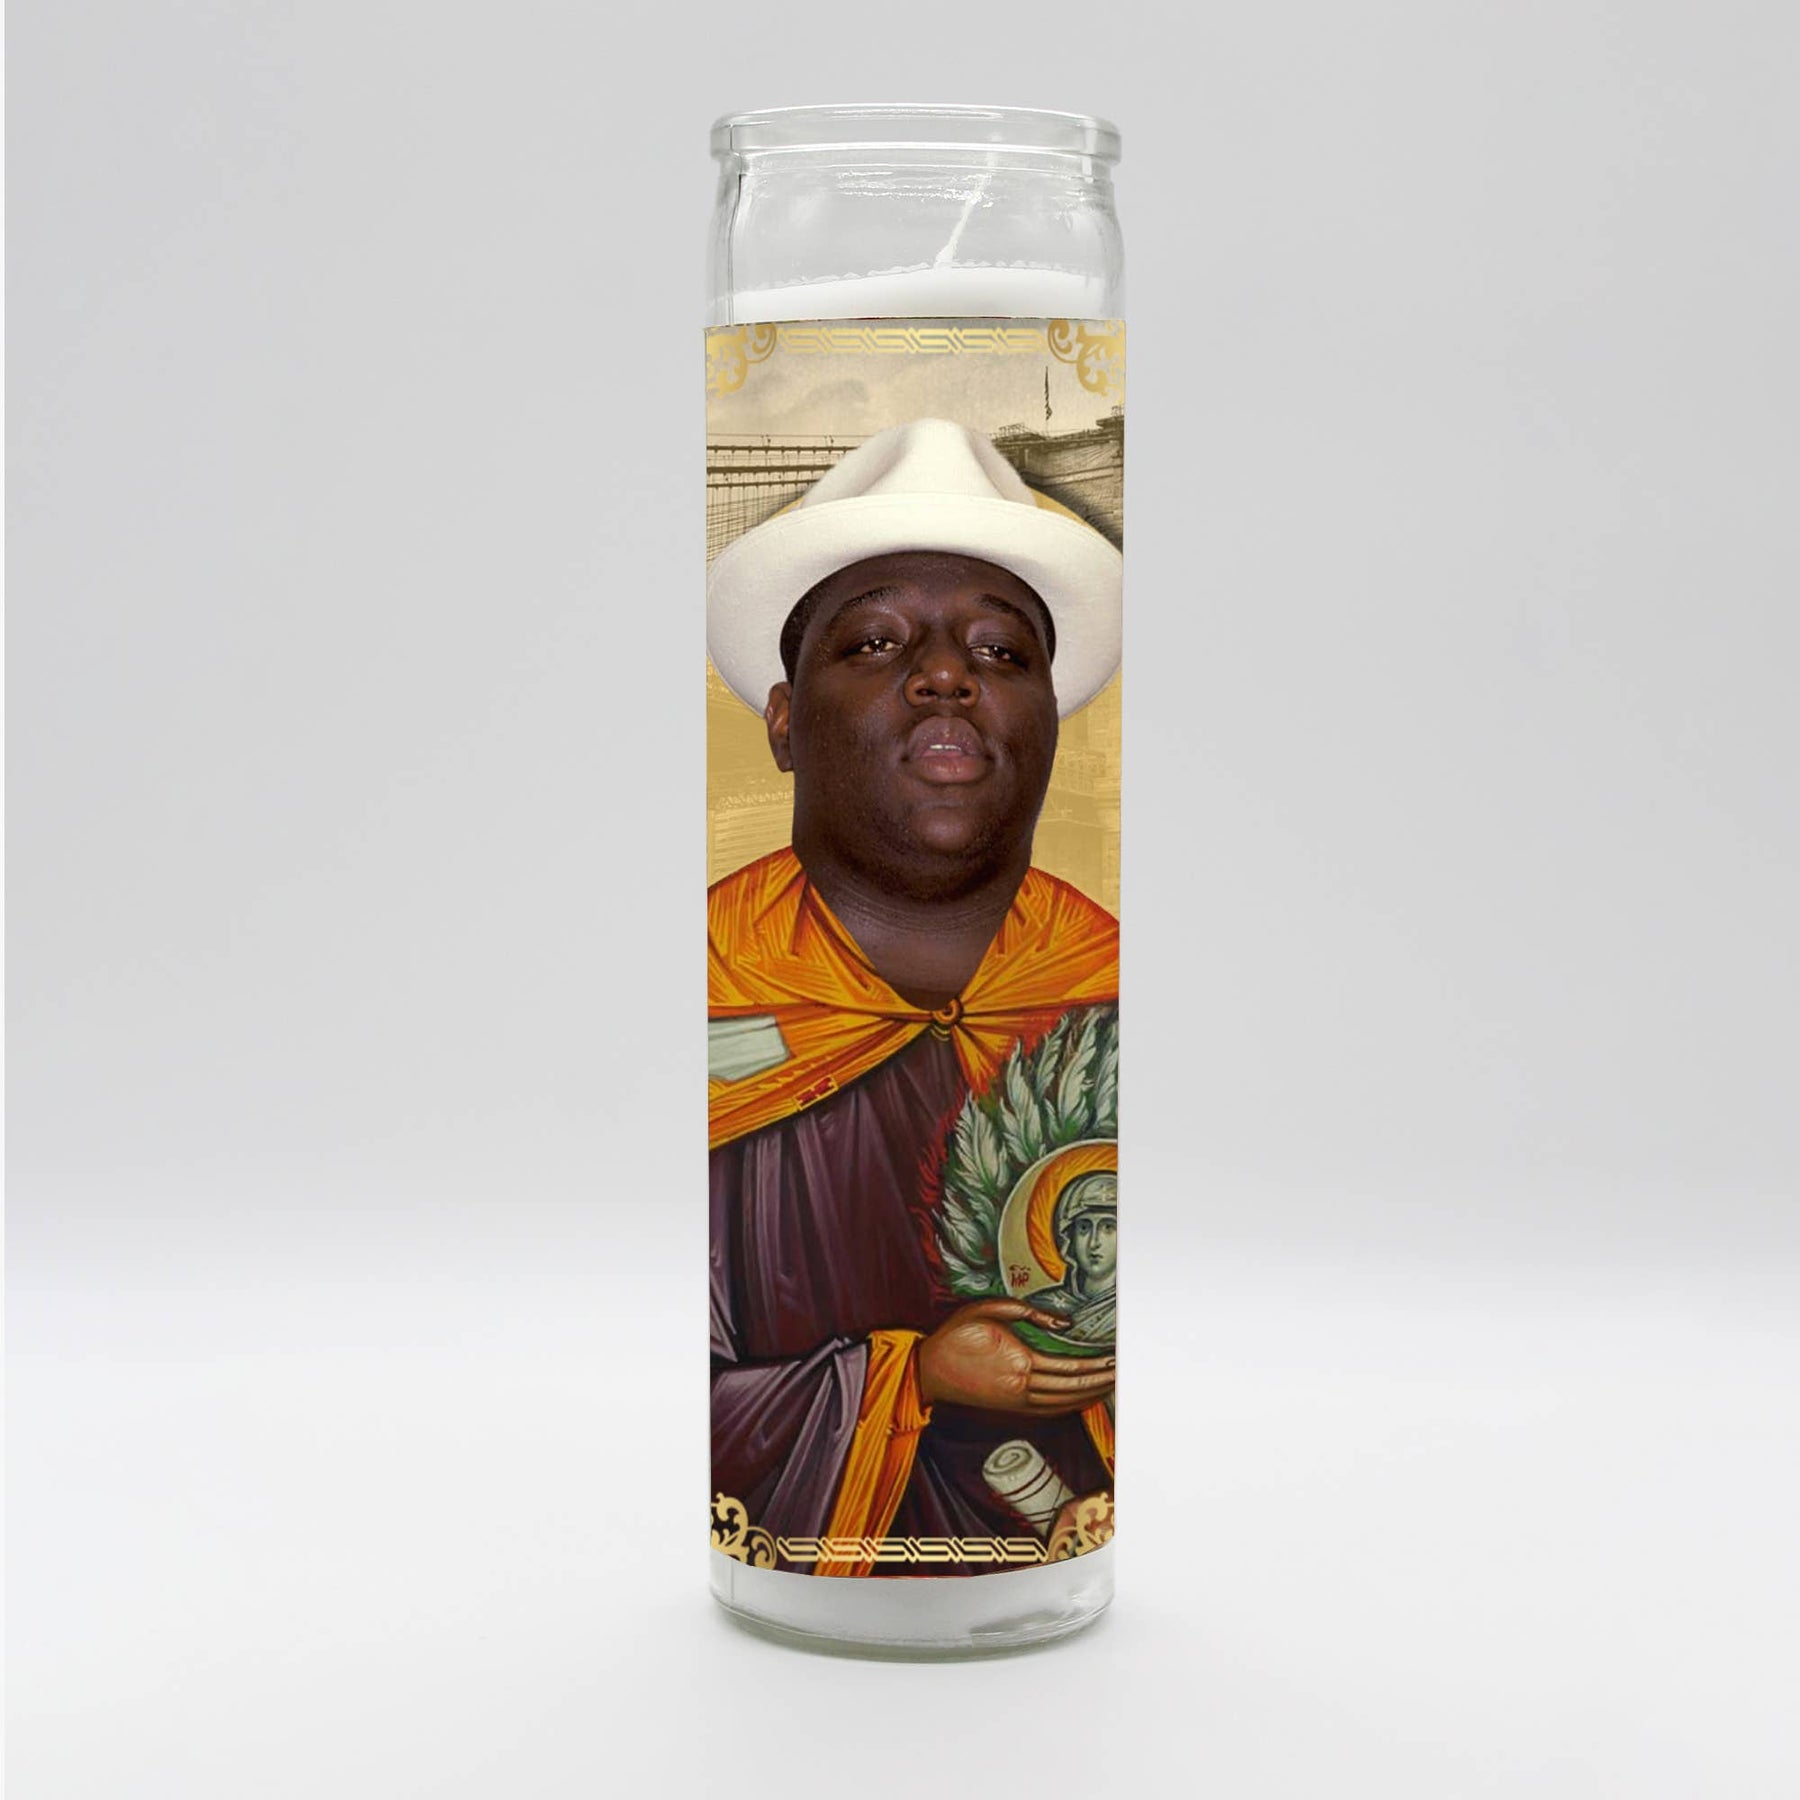 A man in a white hat holds The Notorious B.I.G. Candle, hand-poured in Mexico, with a close-up of a painting in the background.